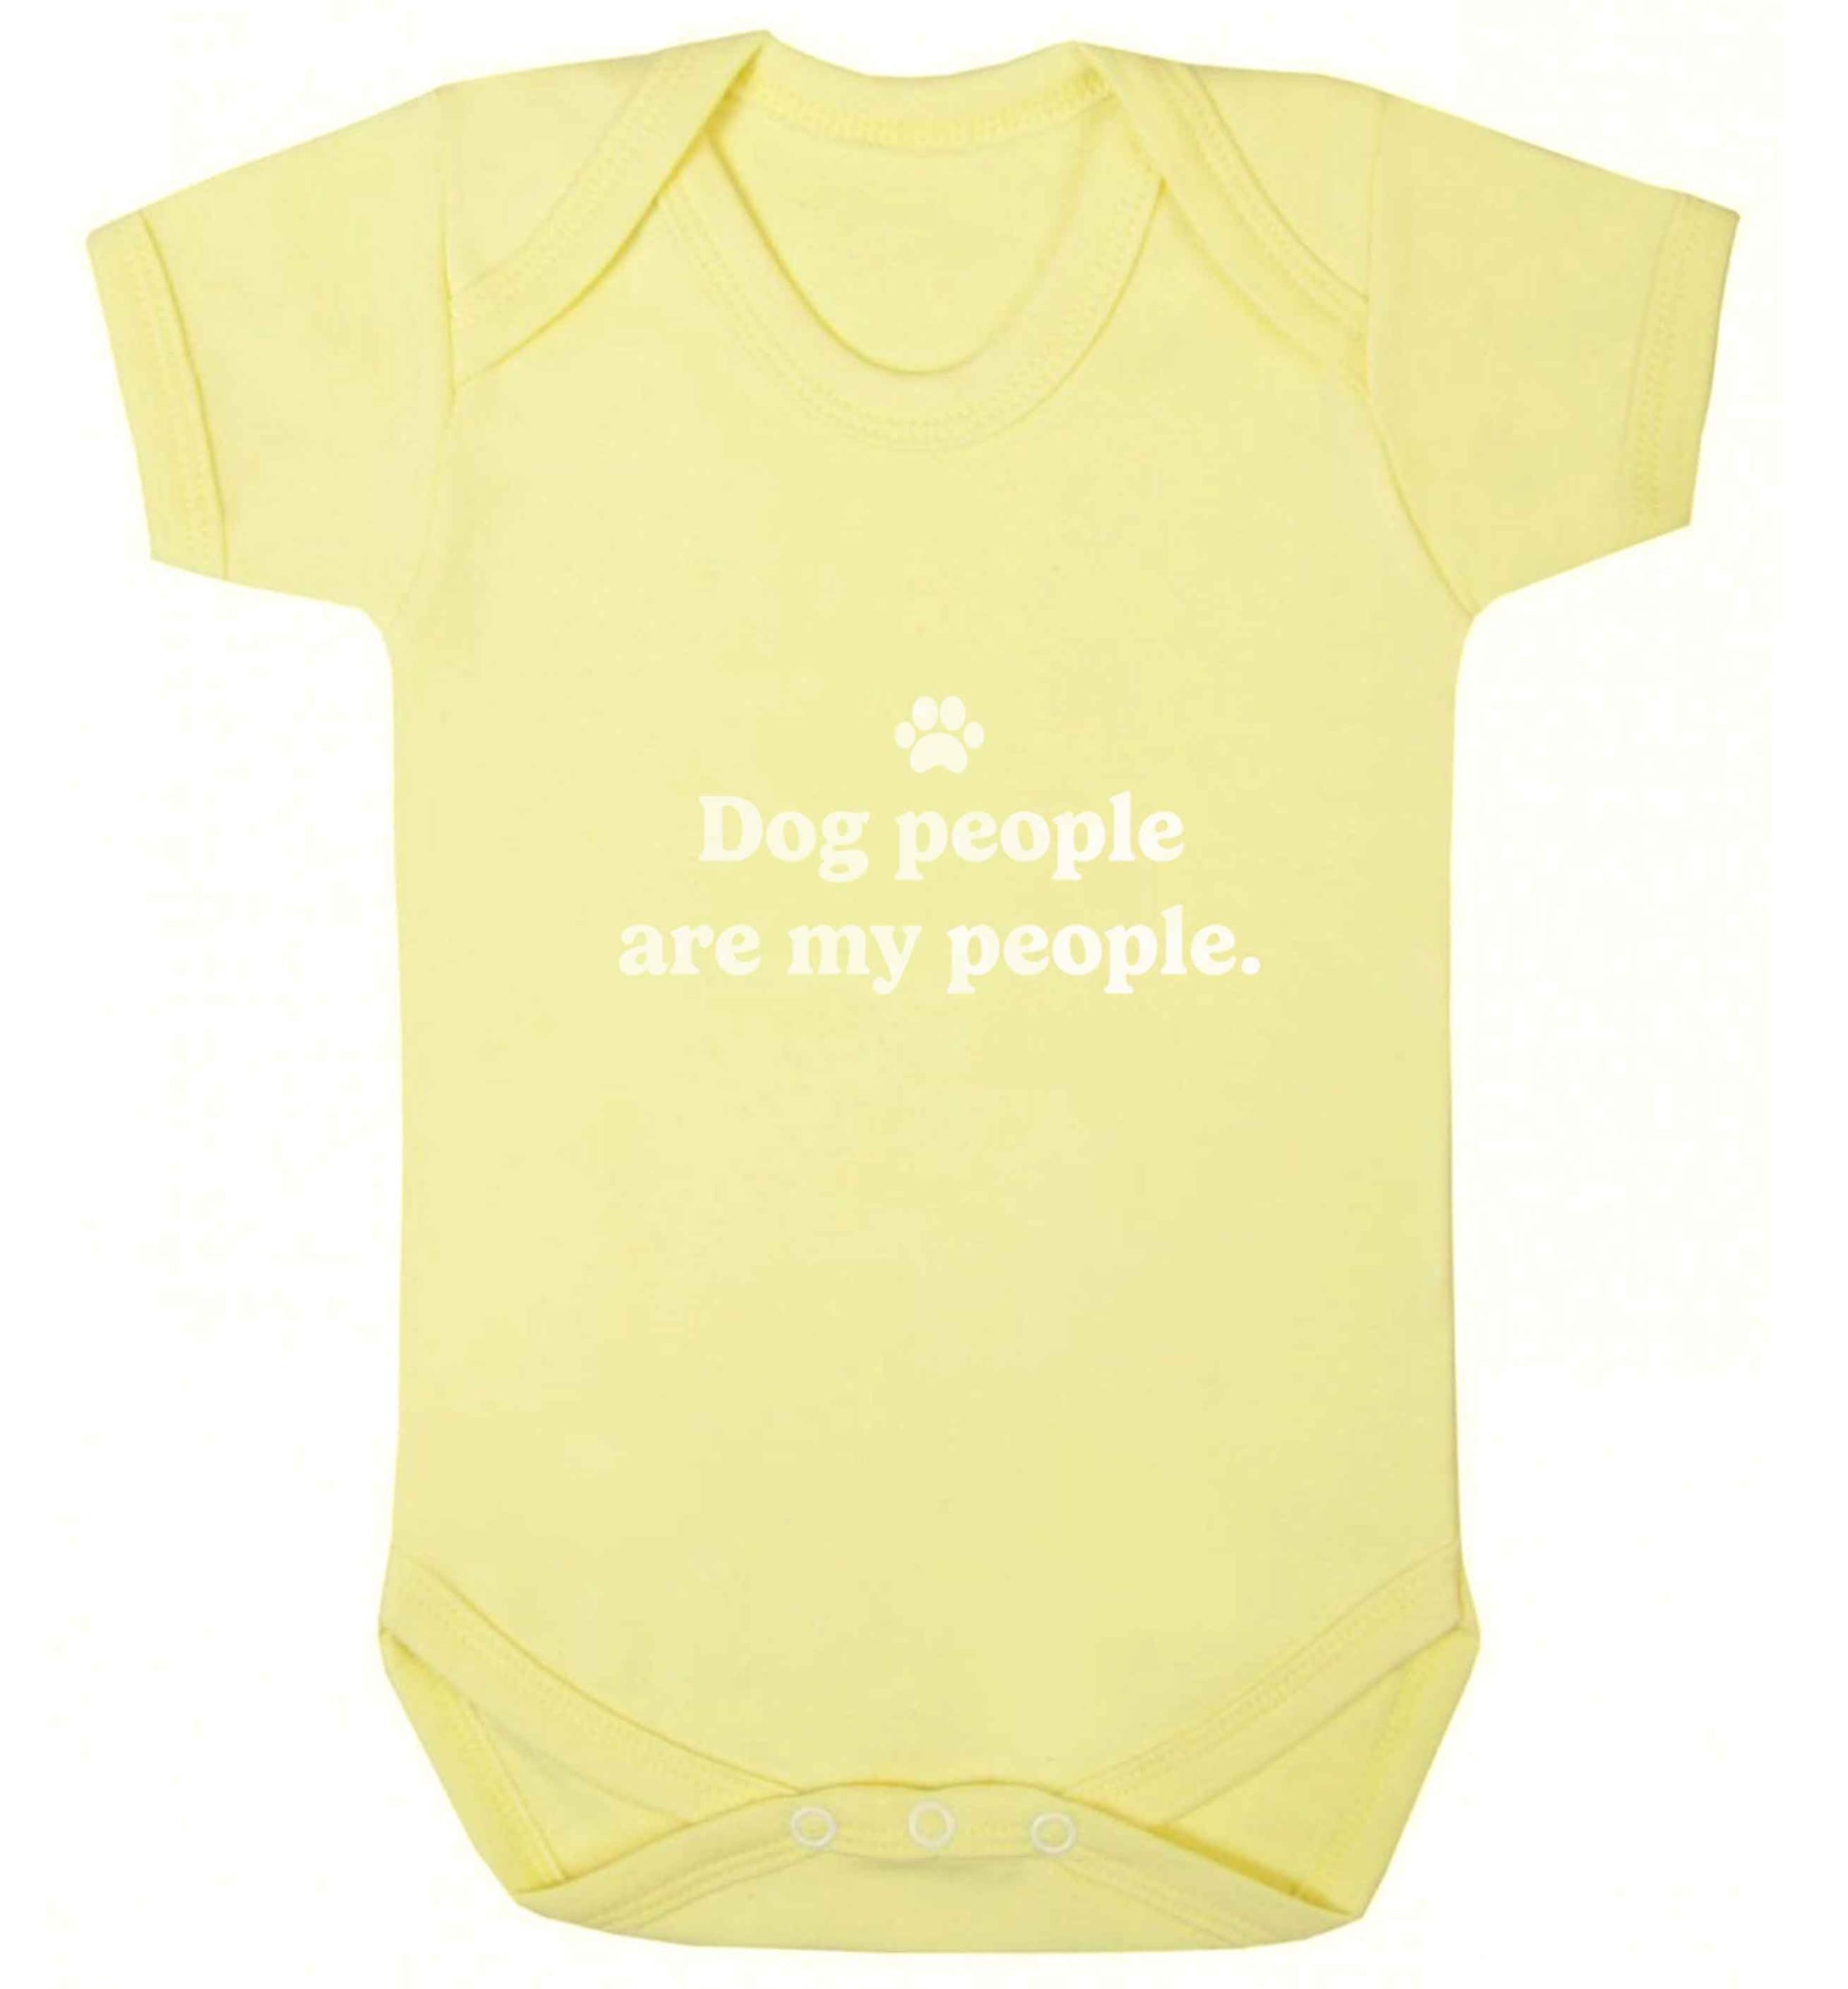 Bear With Me Kit baby vest pale yellow 18-24 months